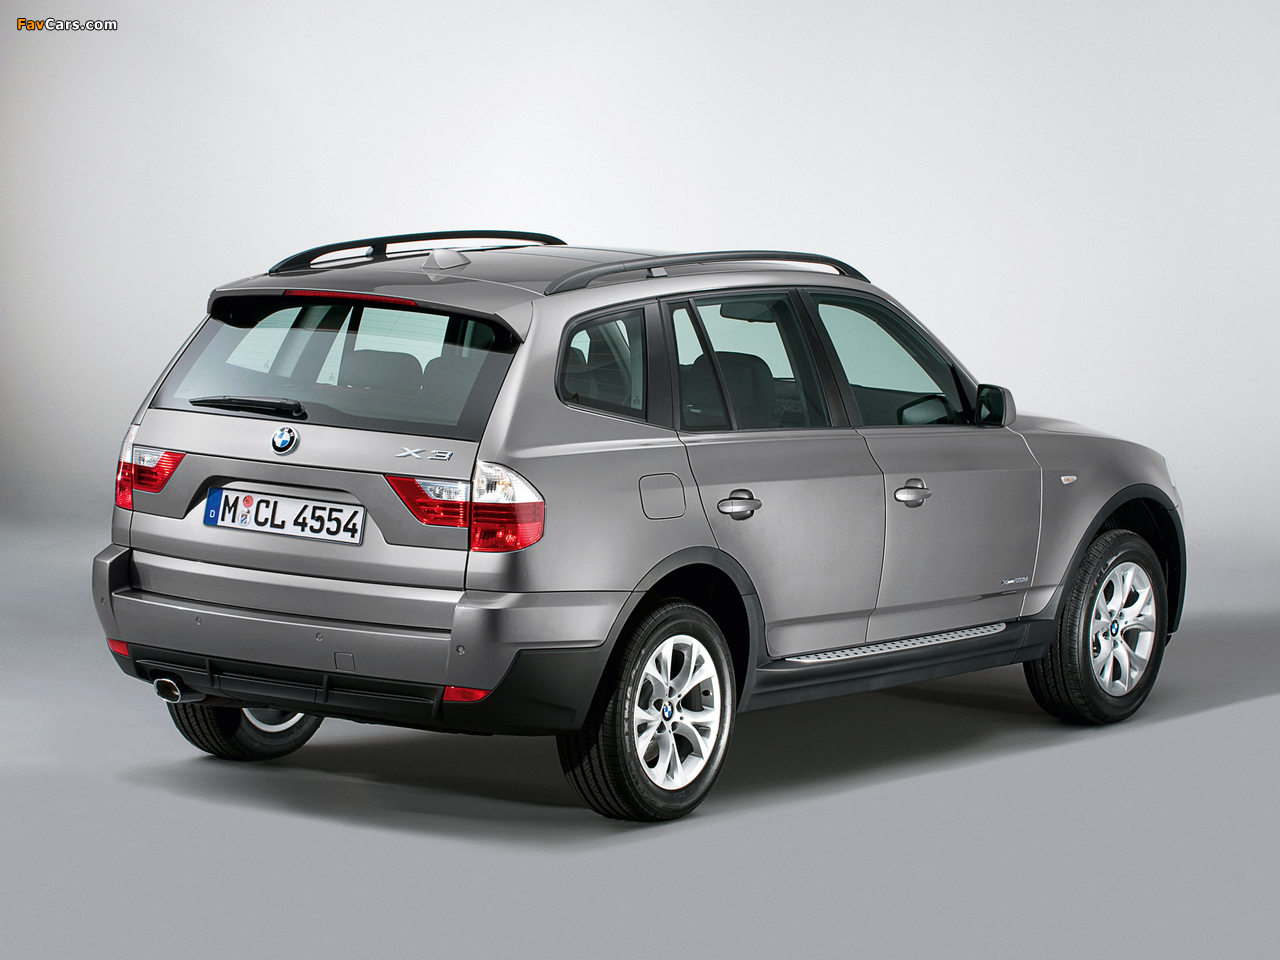 Images of BMW X3 xDrive20d Lifestyle Edition (E83) 2008 (1280 x 960)